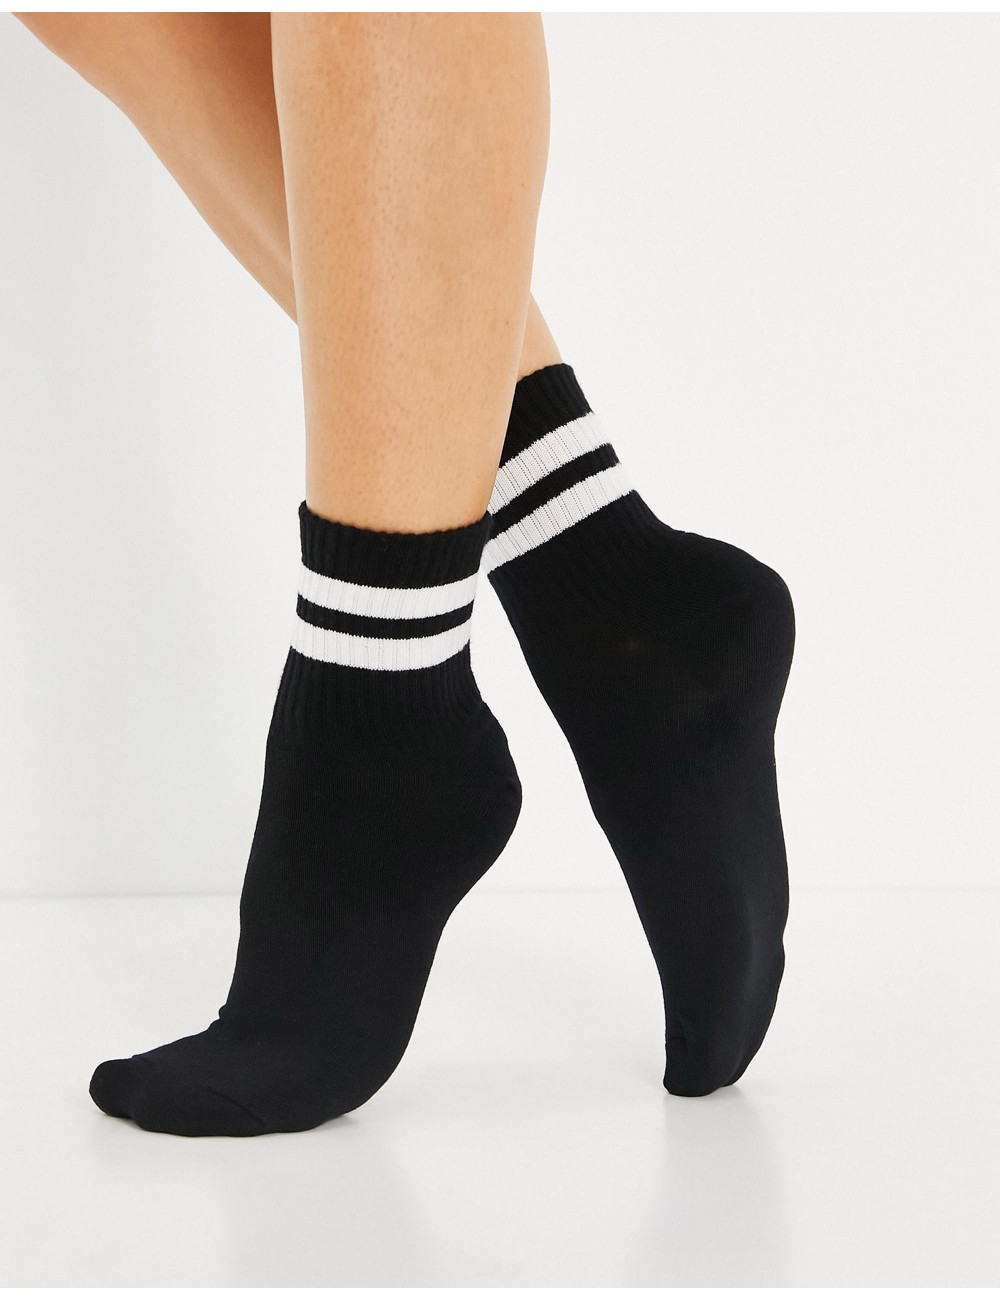 Accessorize socks with...